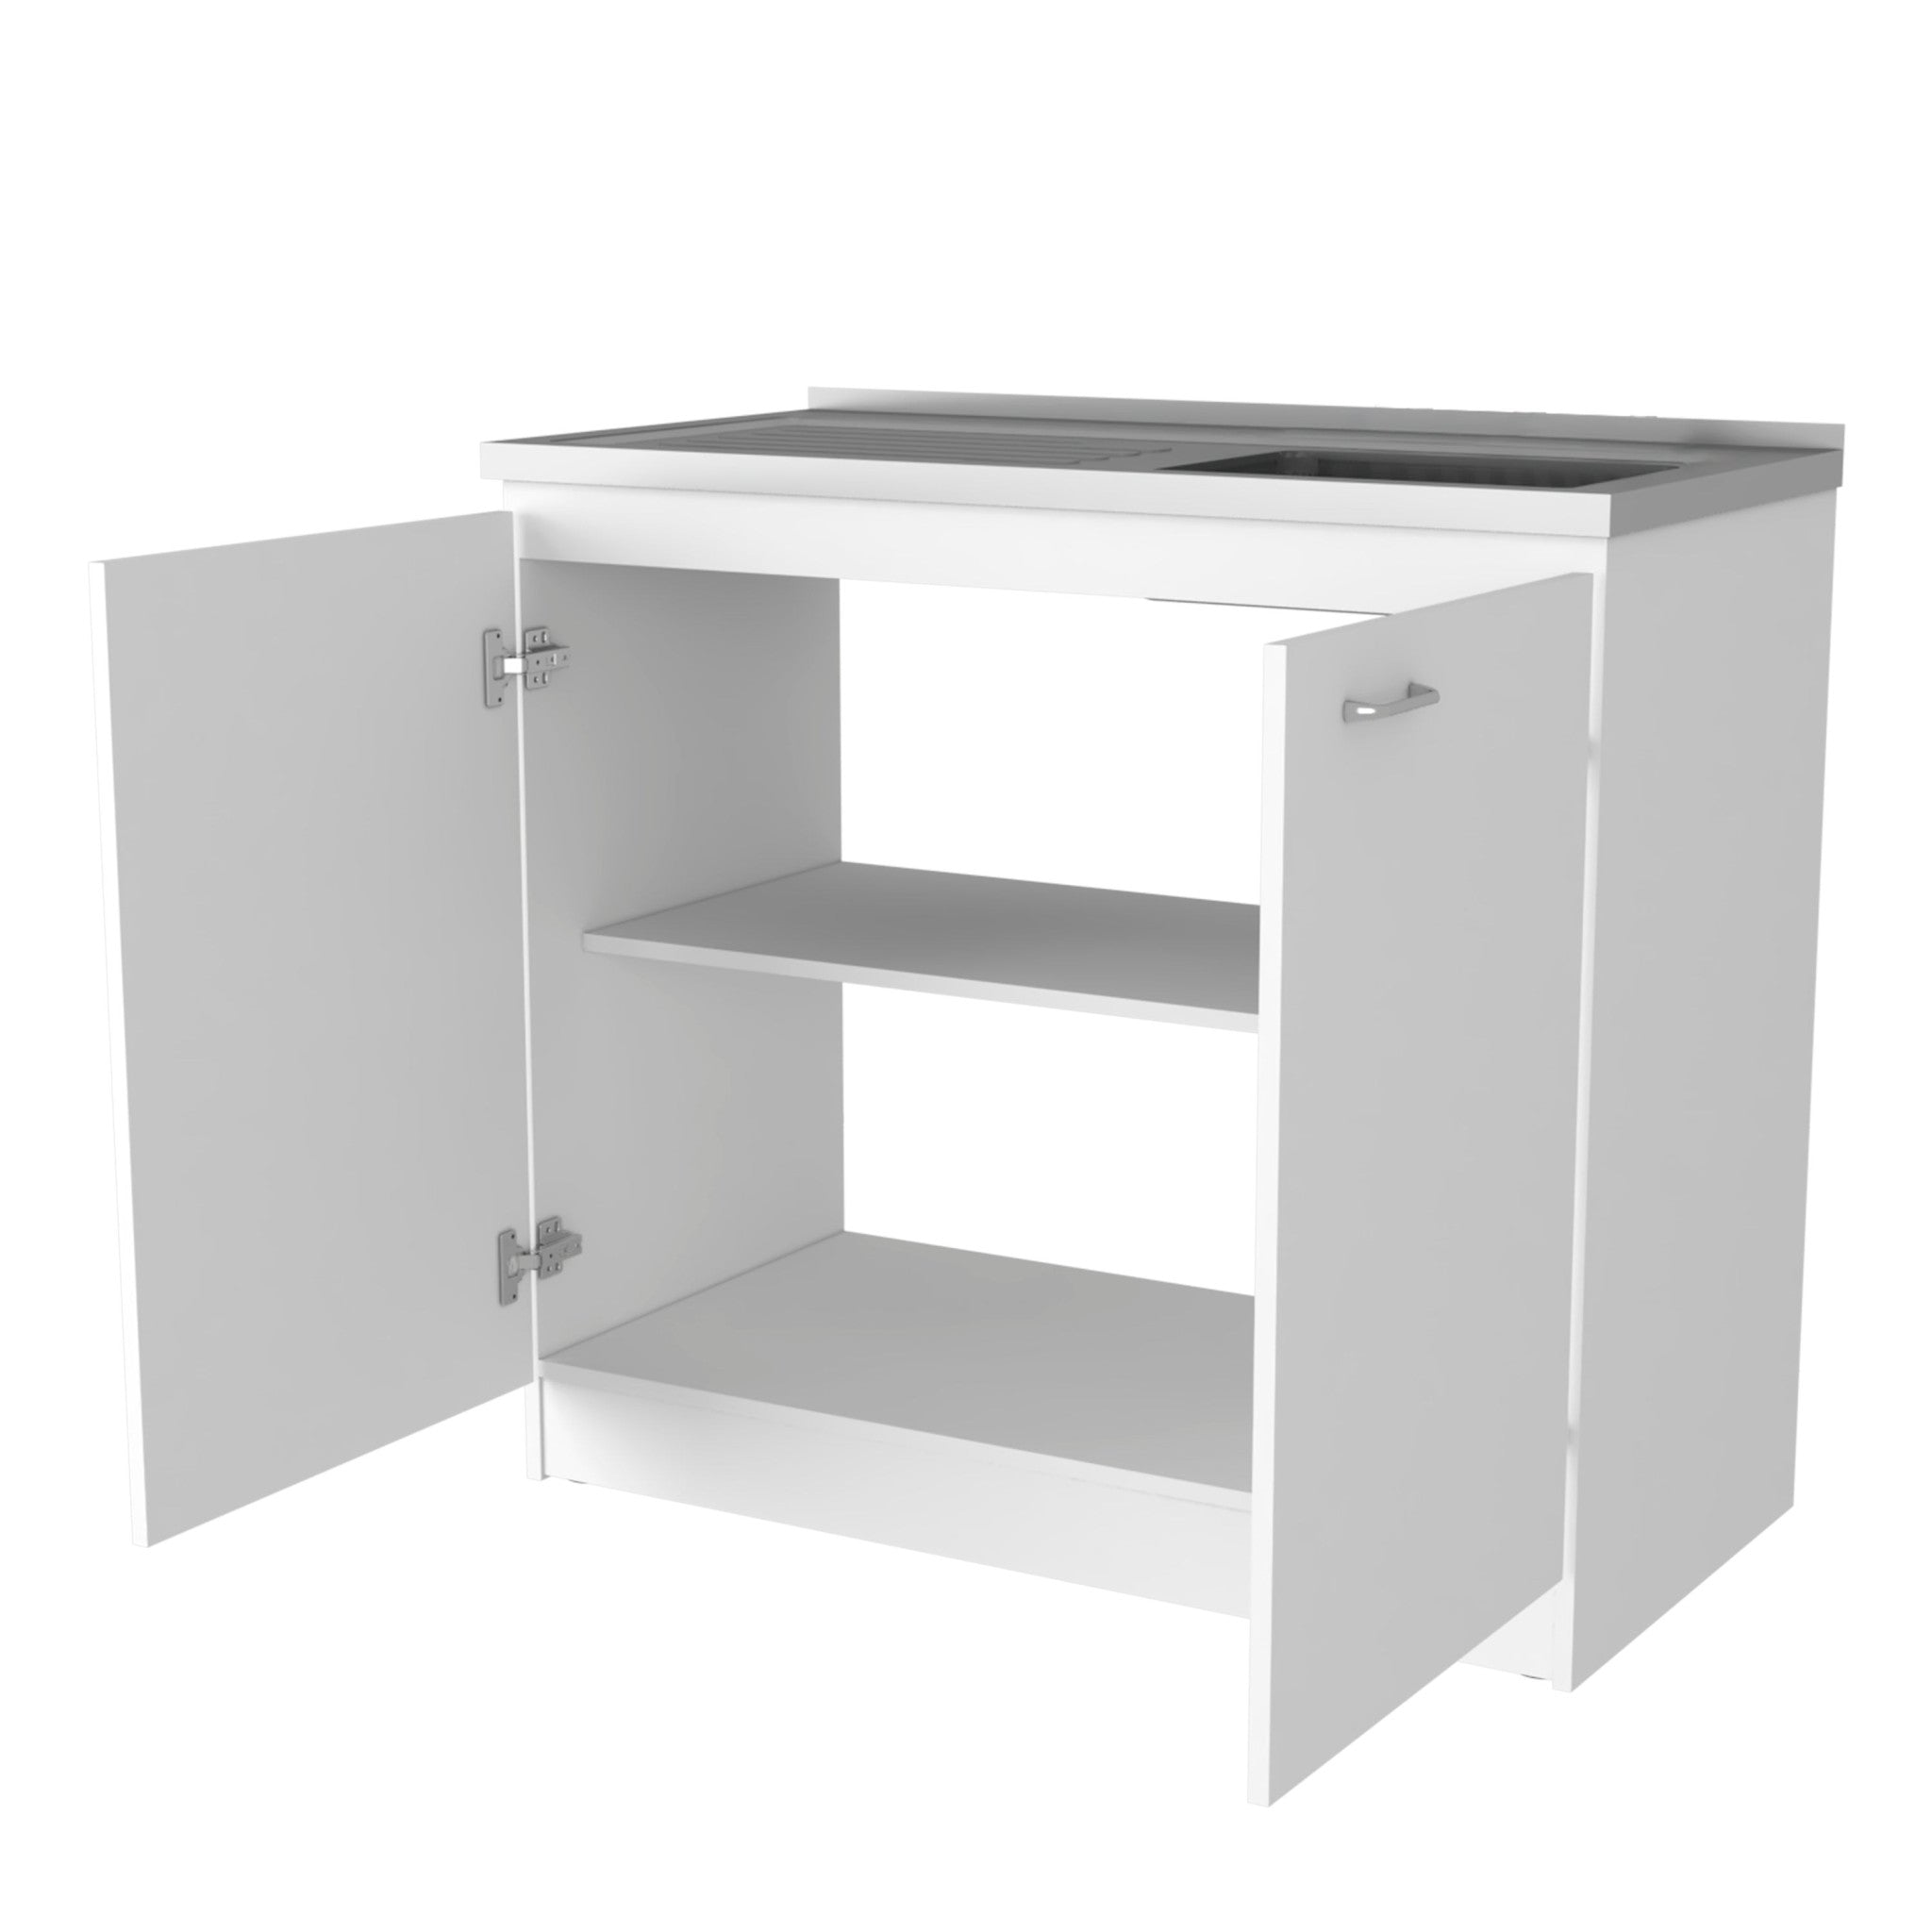 39" White Stainless Steel Accent Cabinet With Two Shelves